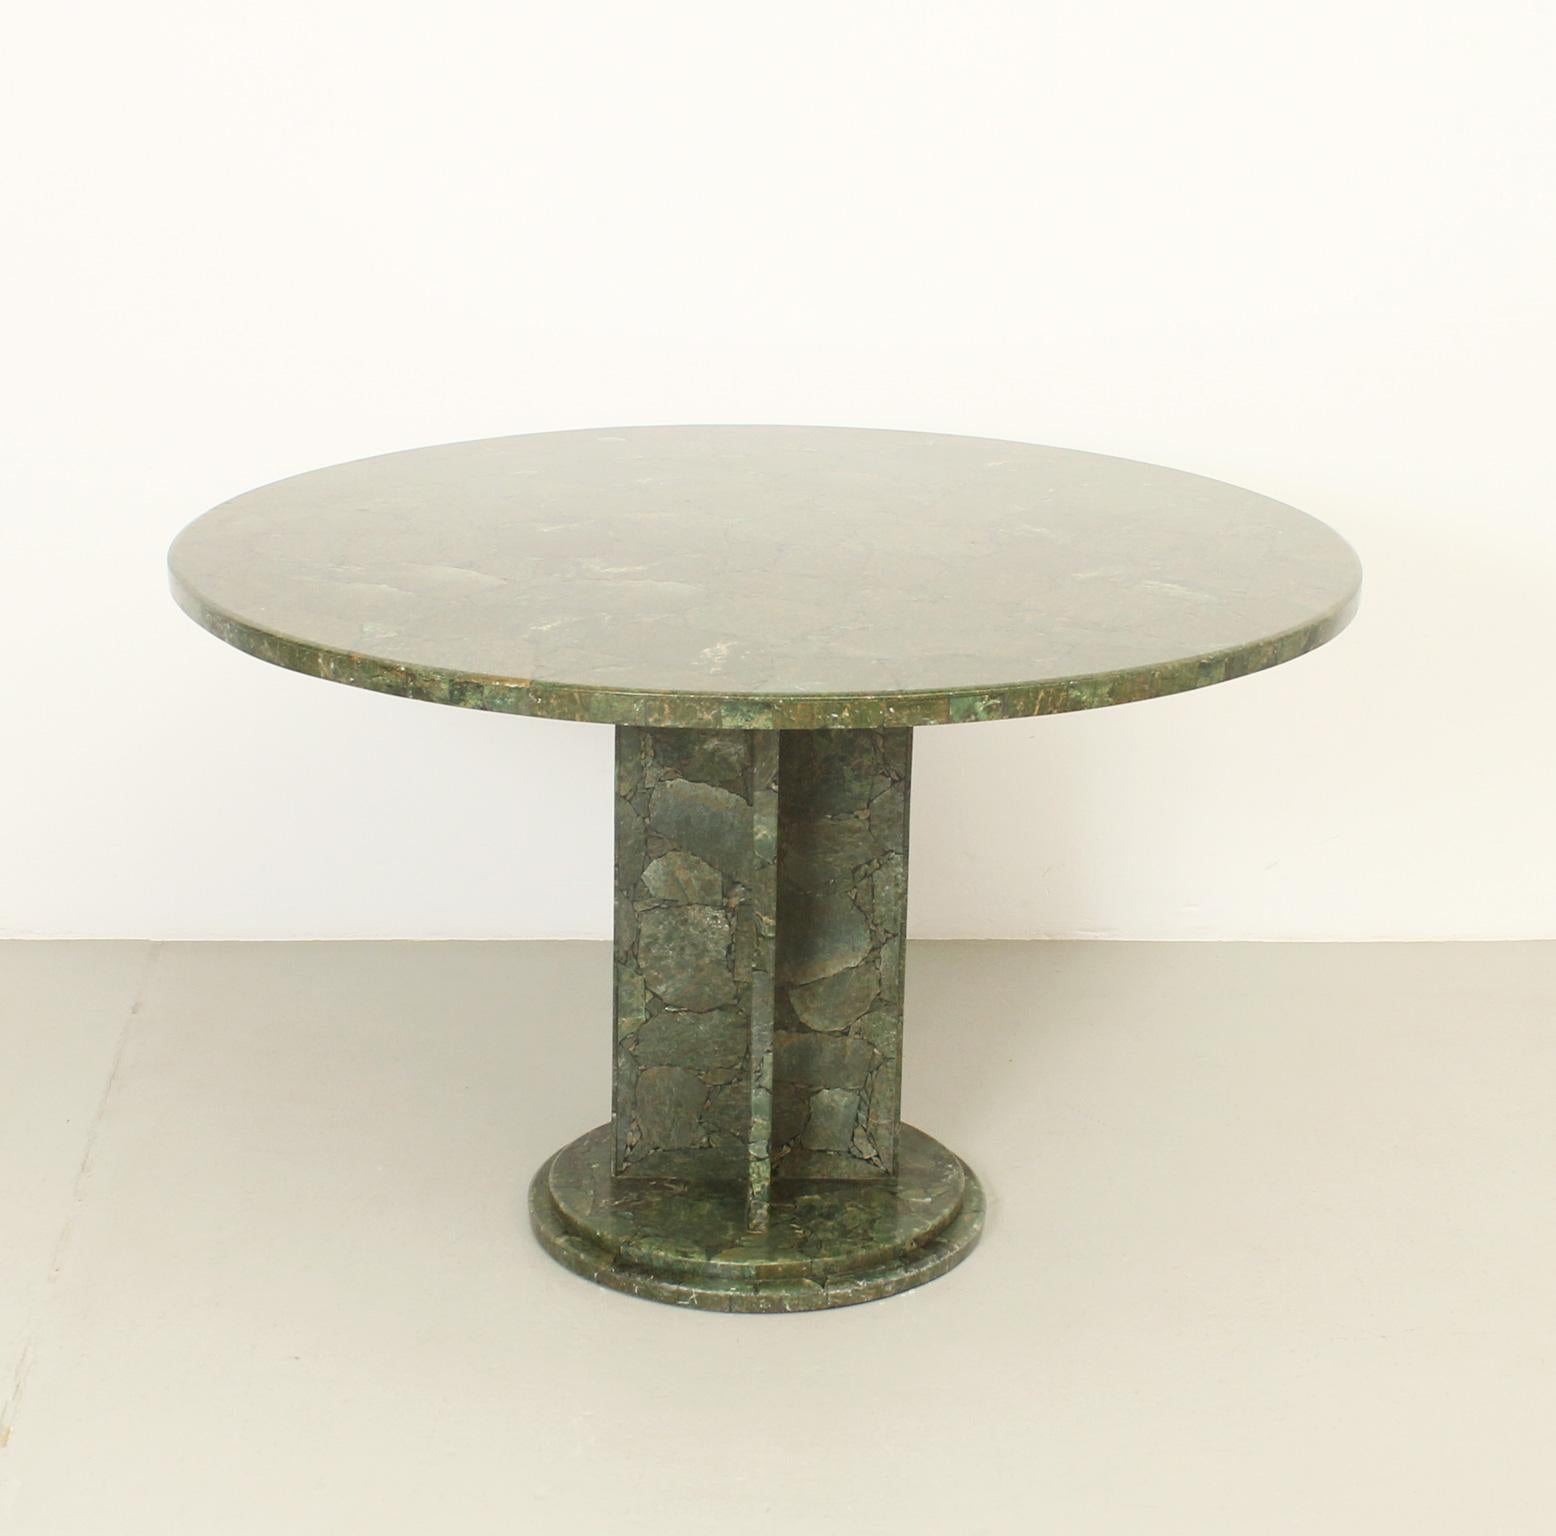 Dining table in green marble from 1970s. Made with pieces of green marble mosaic and black polished resin obtaining a very interesting effect.